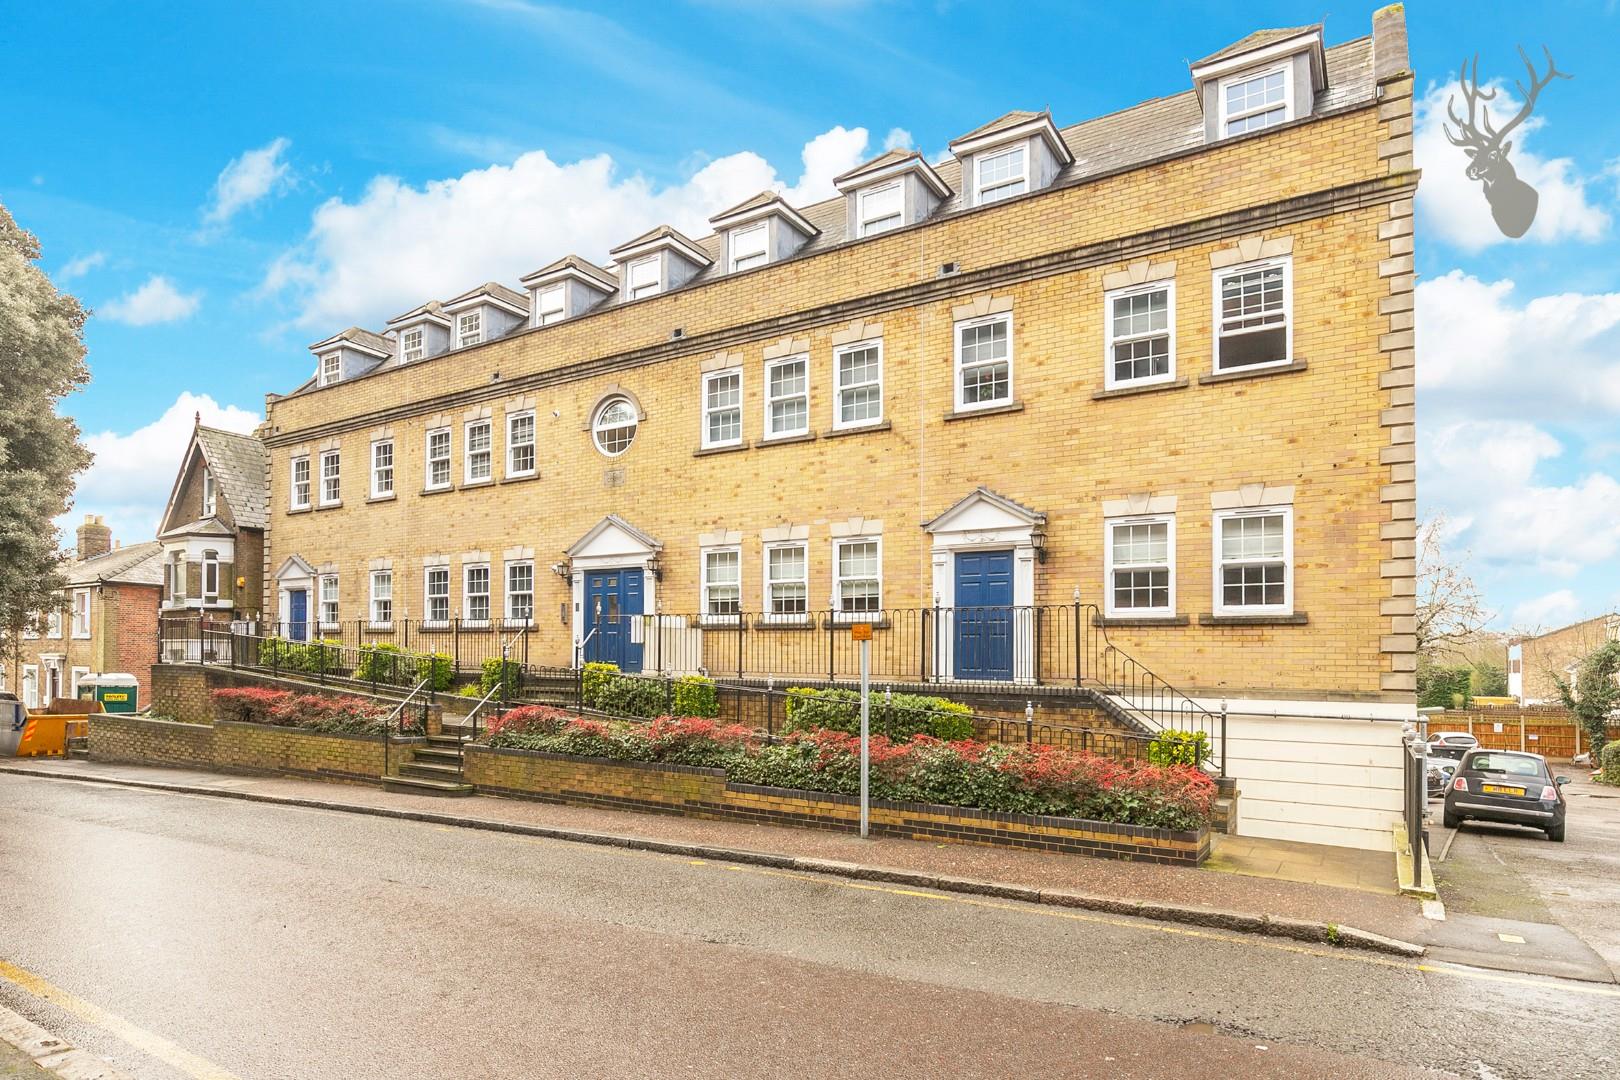 Similar Property: Flat in Brentwood